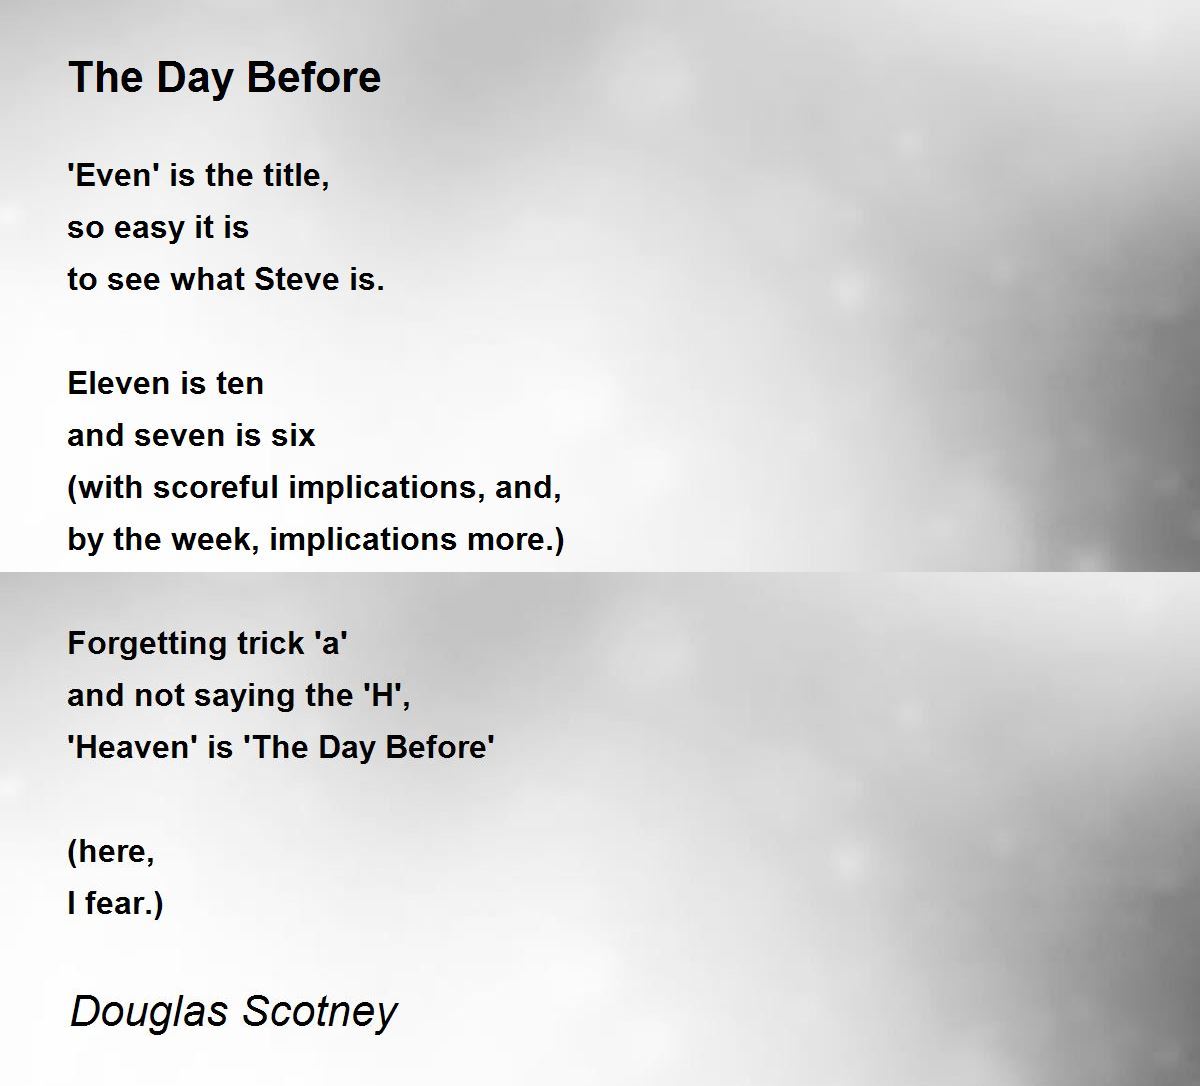 The Day Before - The Day Before Poem by Douglas Scotney